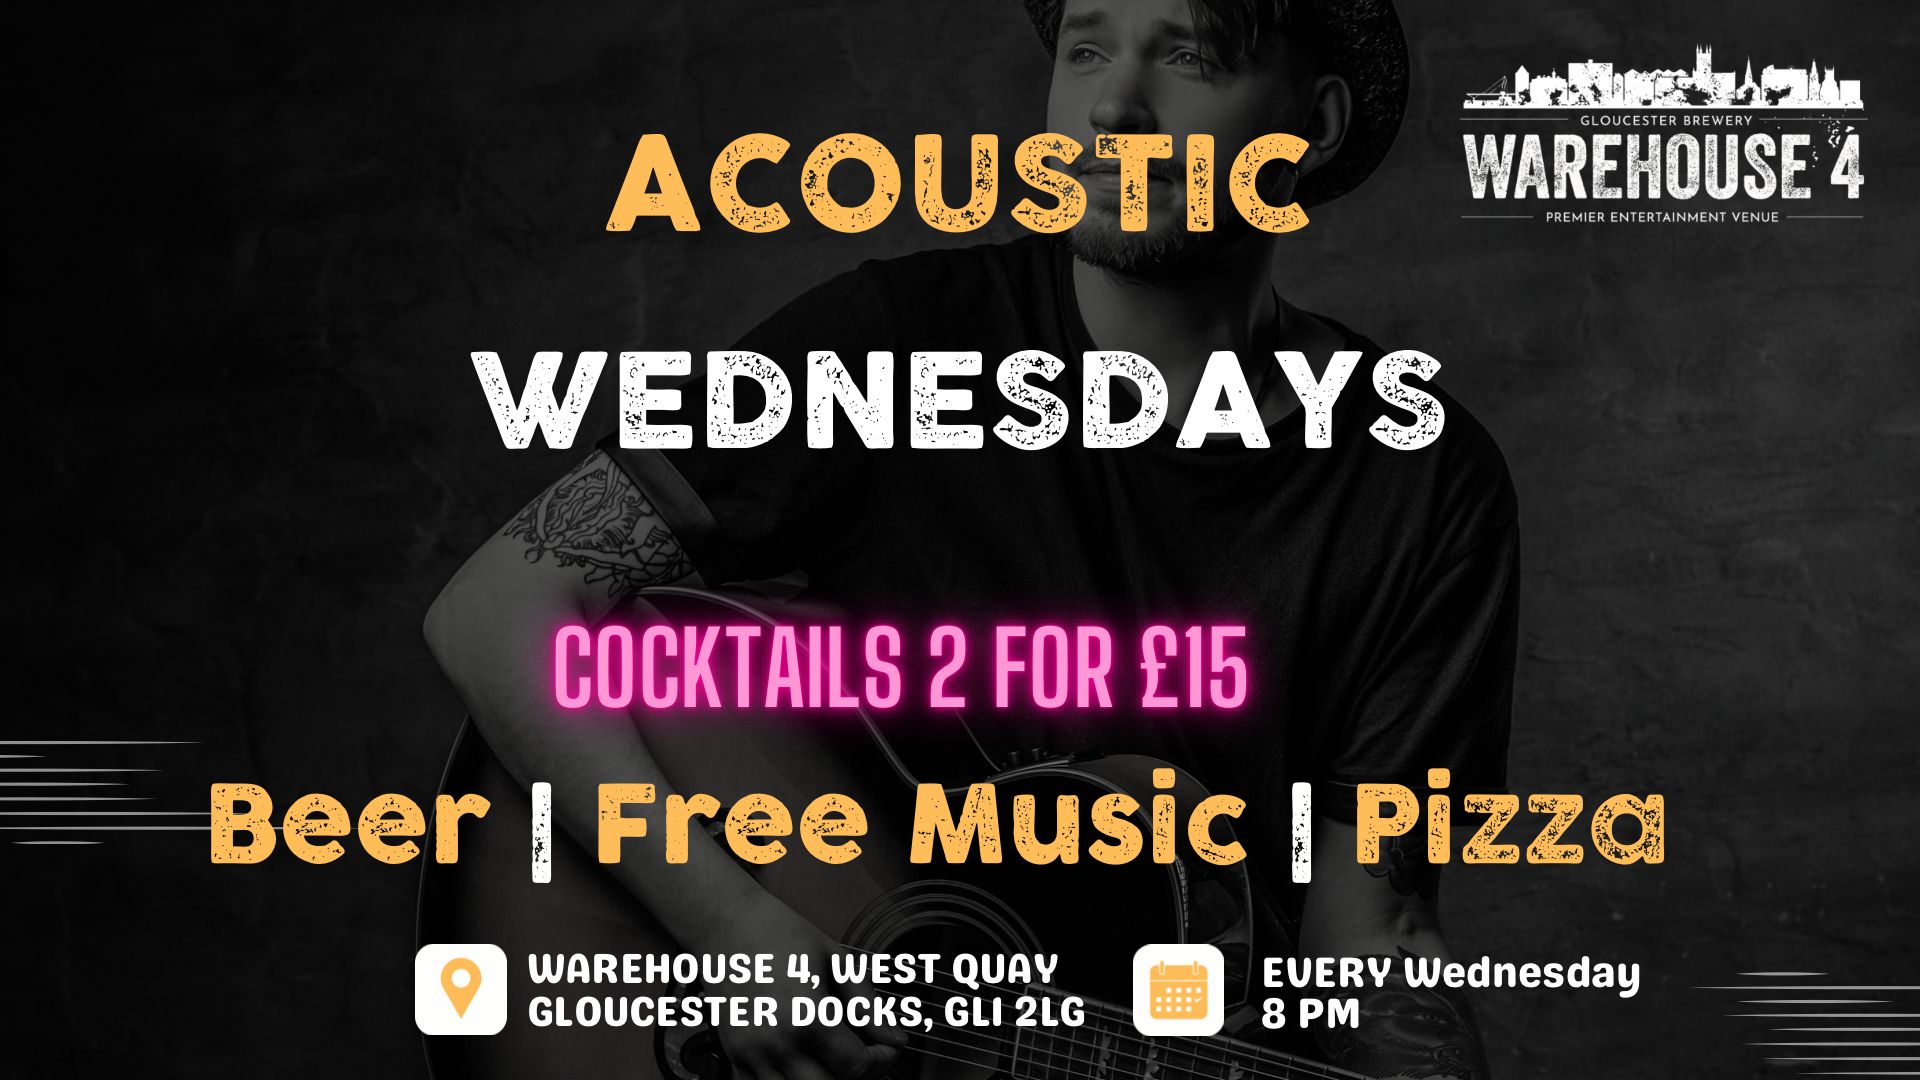 Gloucester Brewery acoustic Wednesday hosted in Warehouse 4 each Wednesday at 8 pm